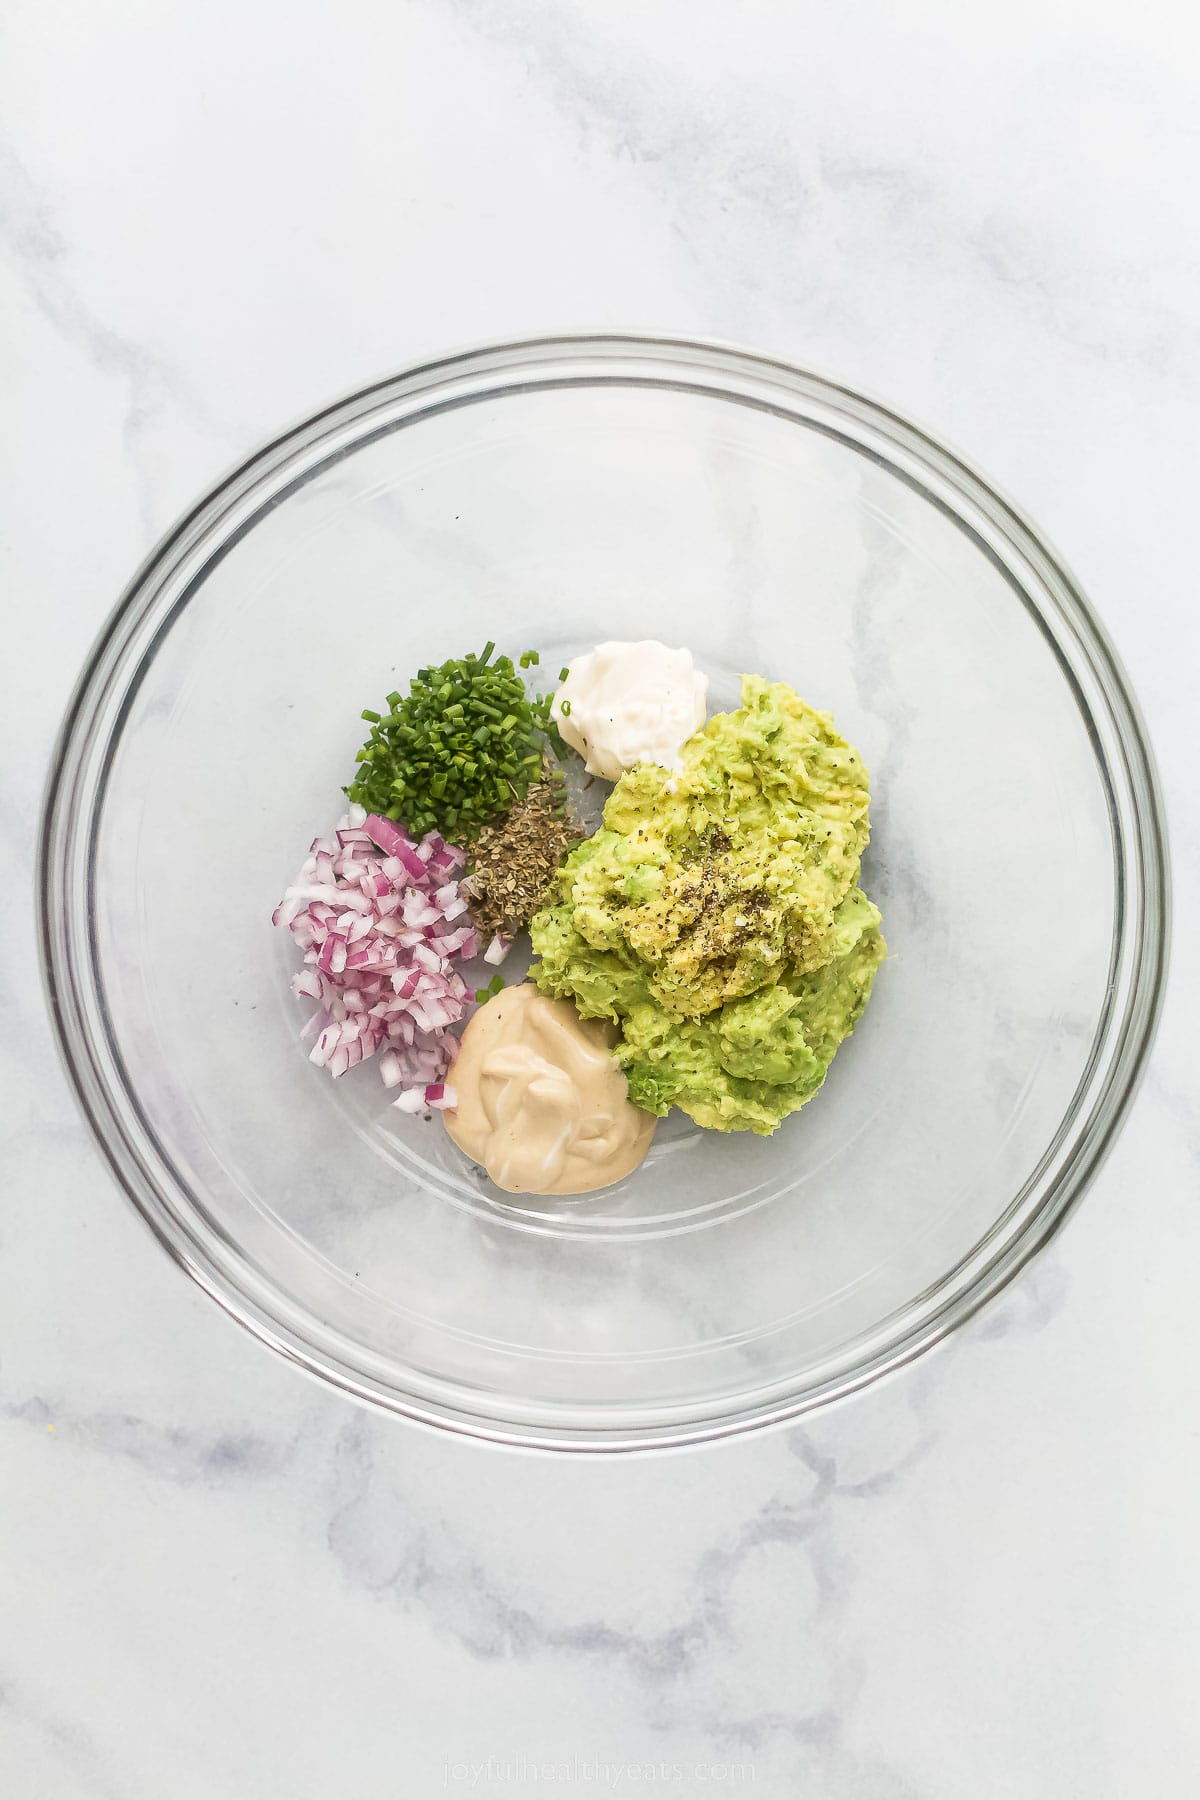 various ingredients to make an avocado dressing like avocado, red onion, and c،es.